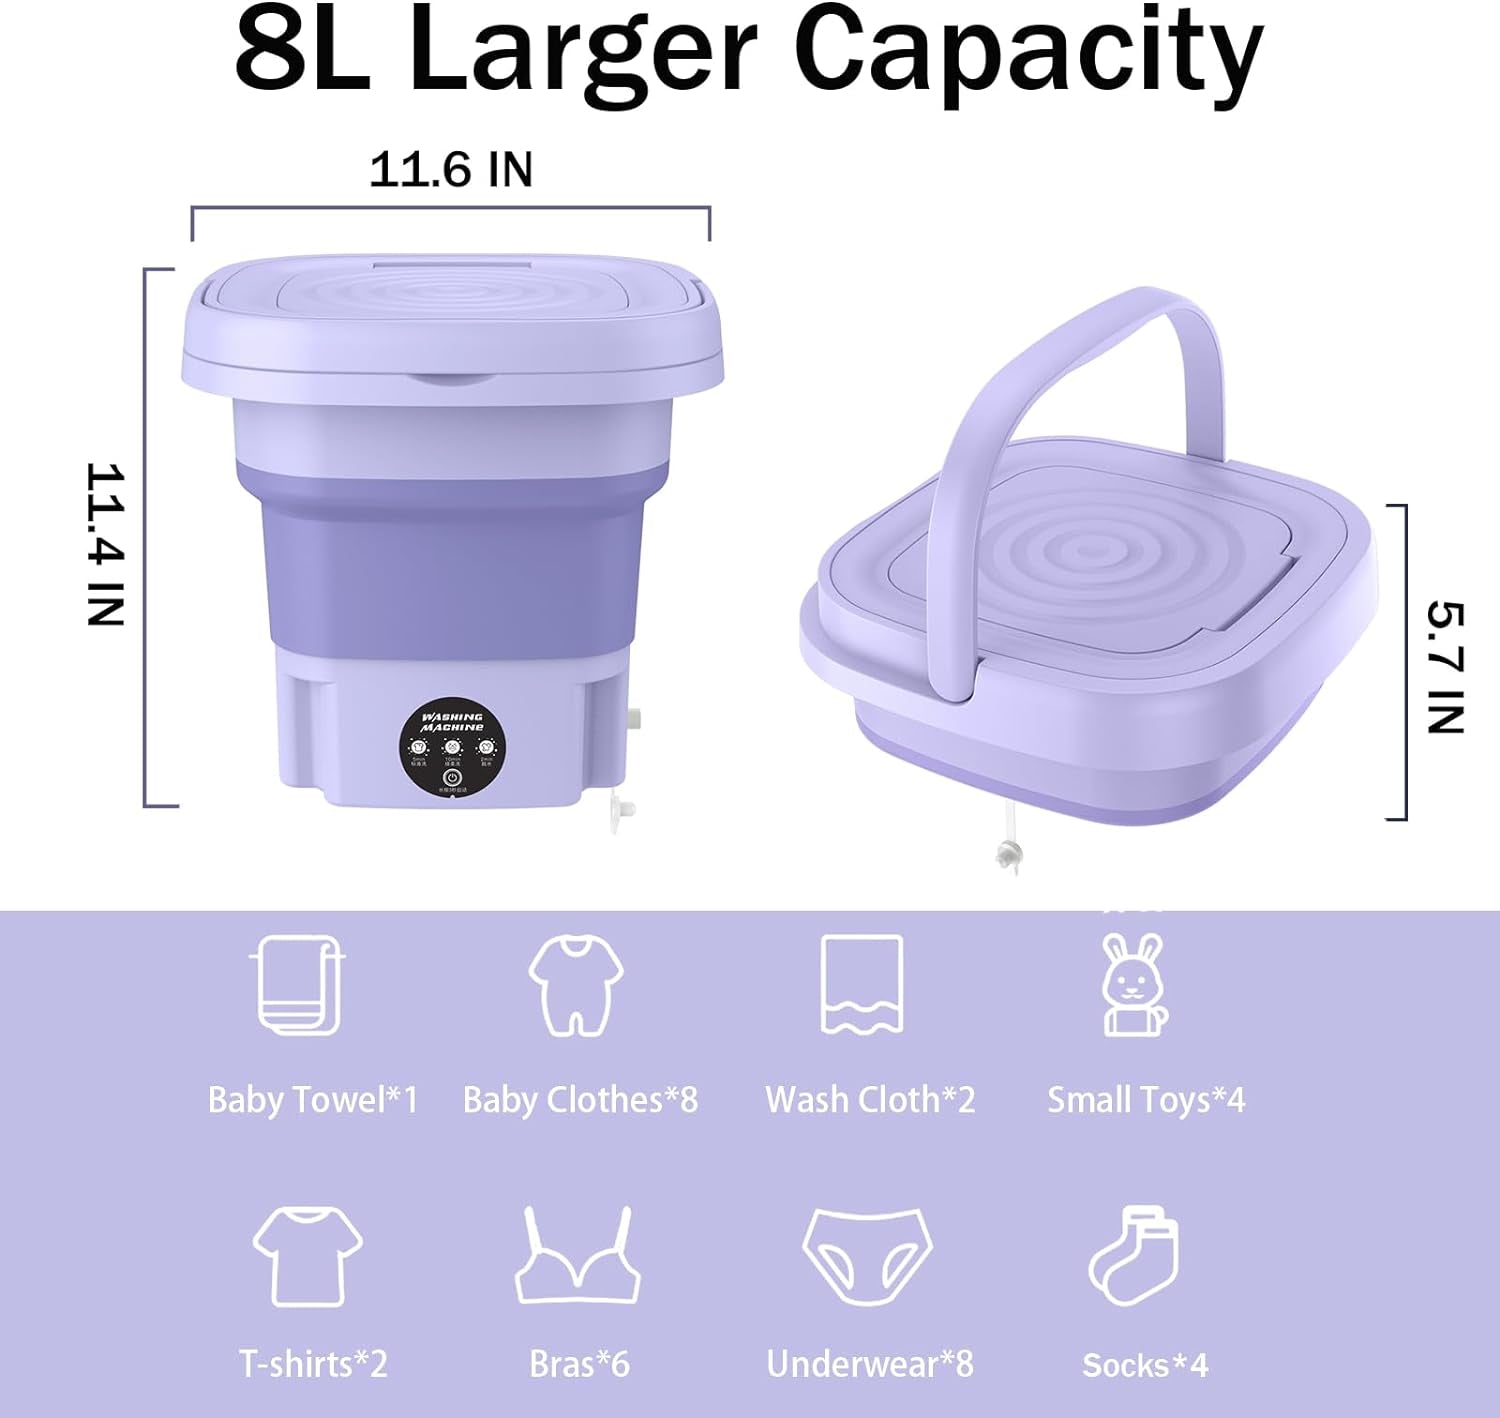 Portable Washing Machine Foldable, Small Washing Machine with 3 Modes Deep Cleaning, Mini Washer for Baby Clothes, Underwear or Small Items, Apartment, Dorm, Camping, RV, Travel, Laundry-Purple